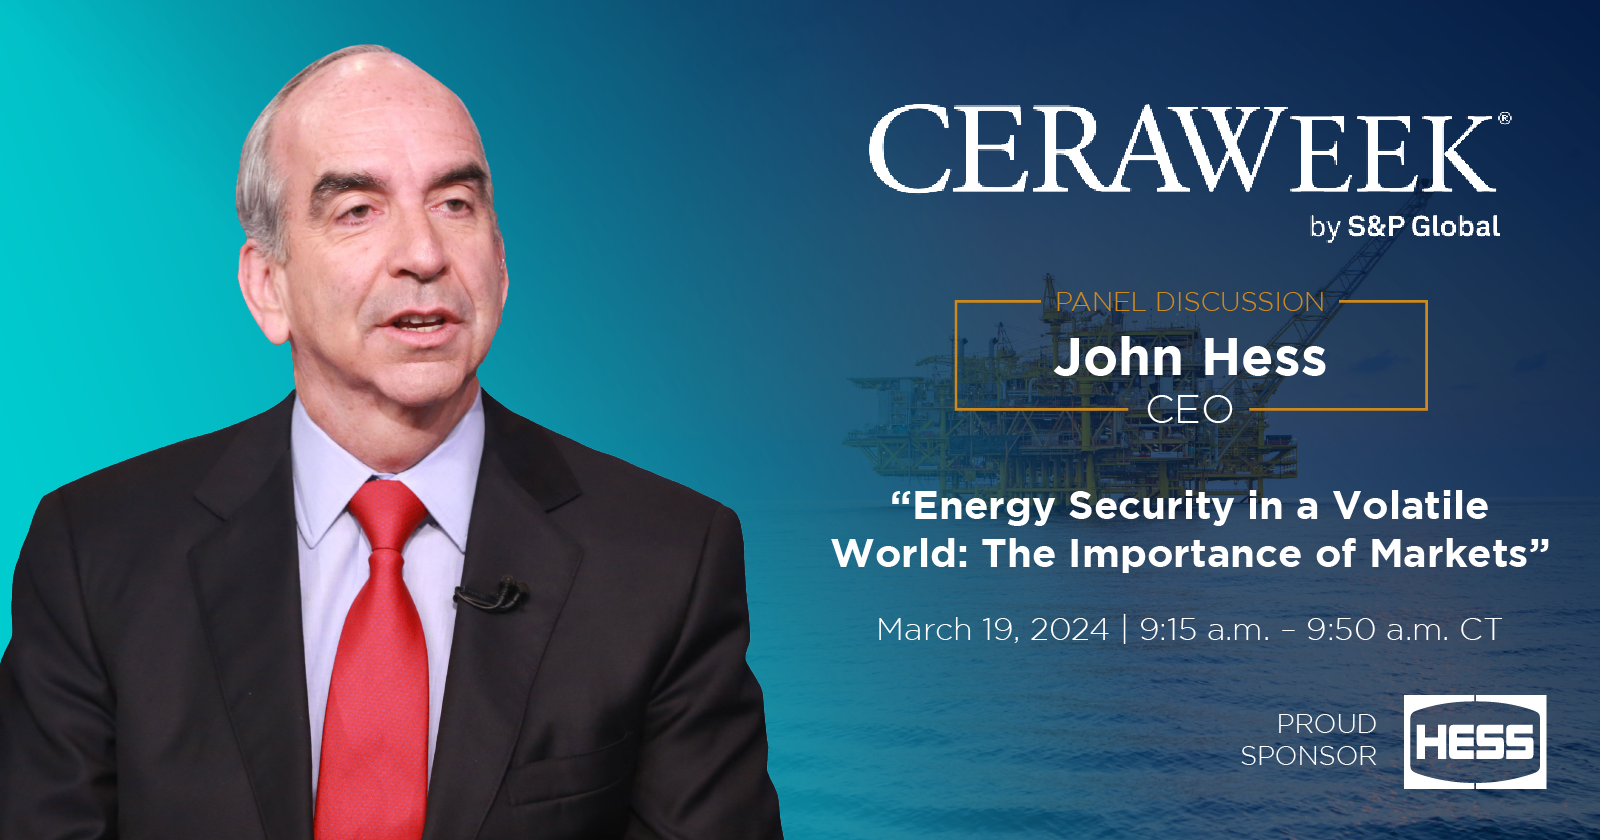 CEO John Hess Joins Panel Discussion at CERAWeek 2024